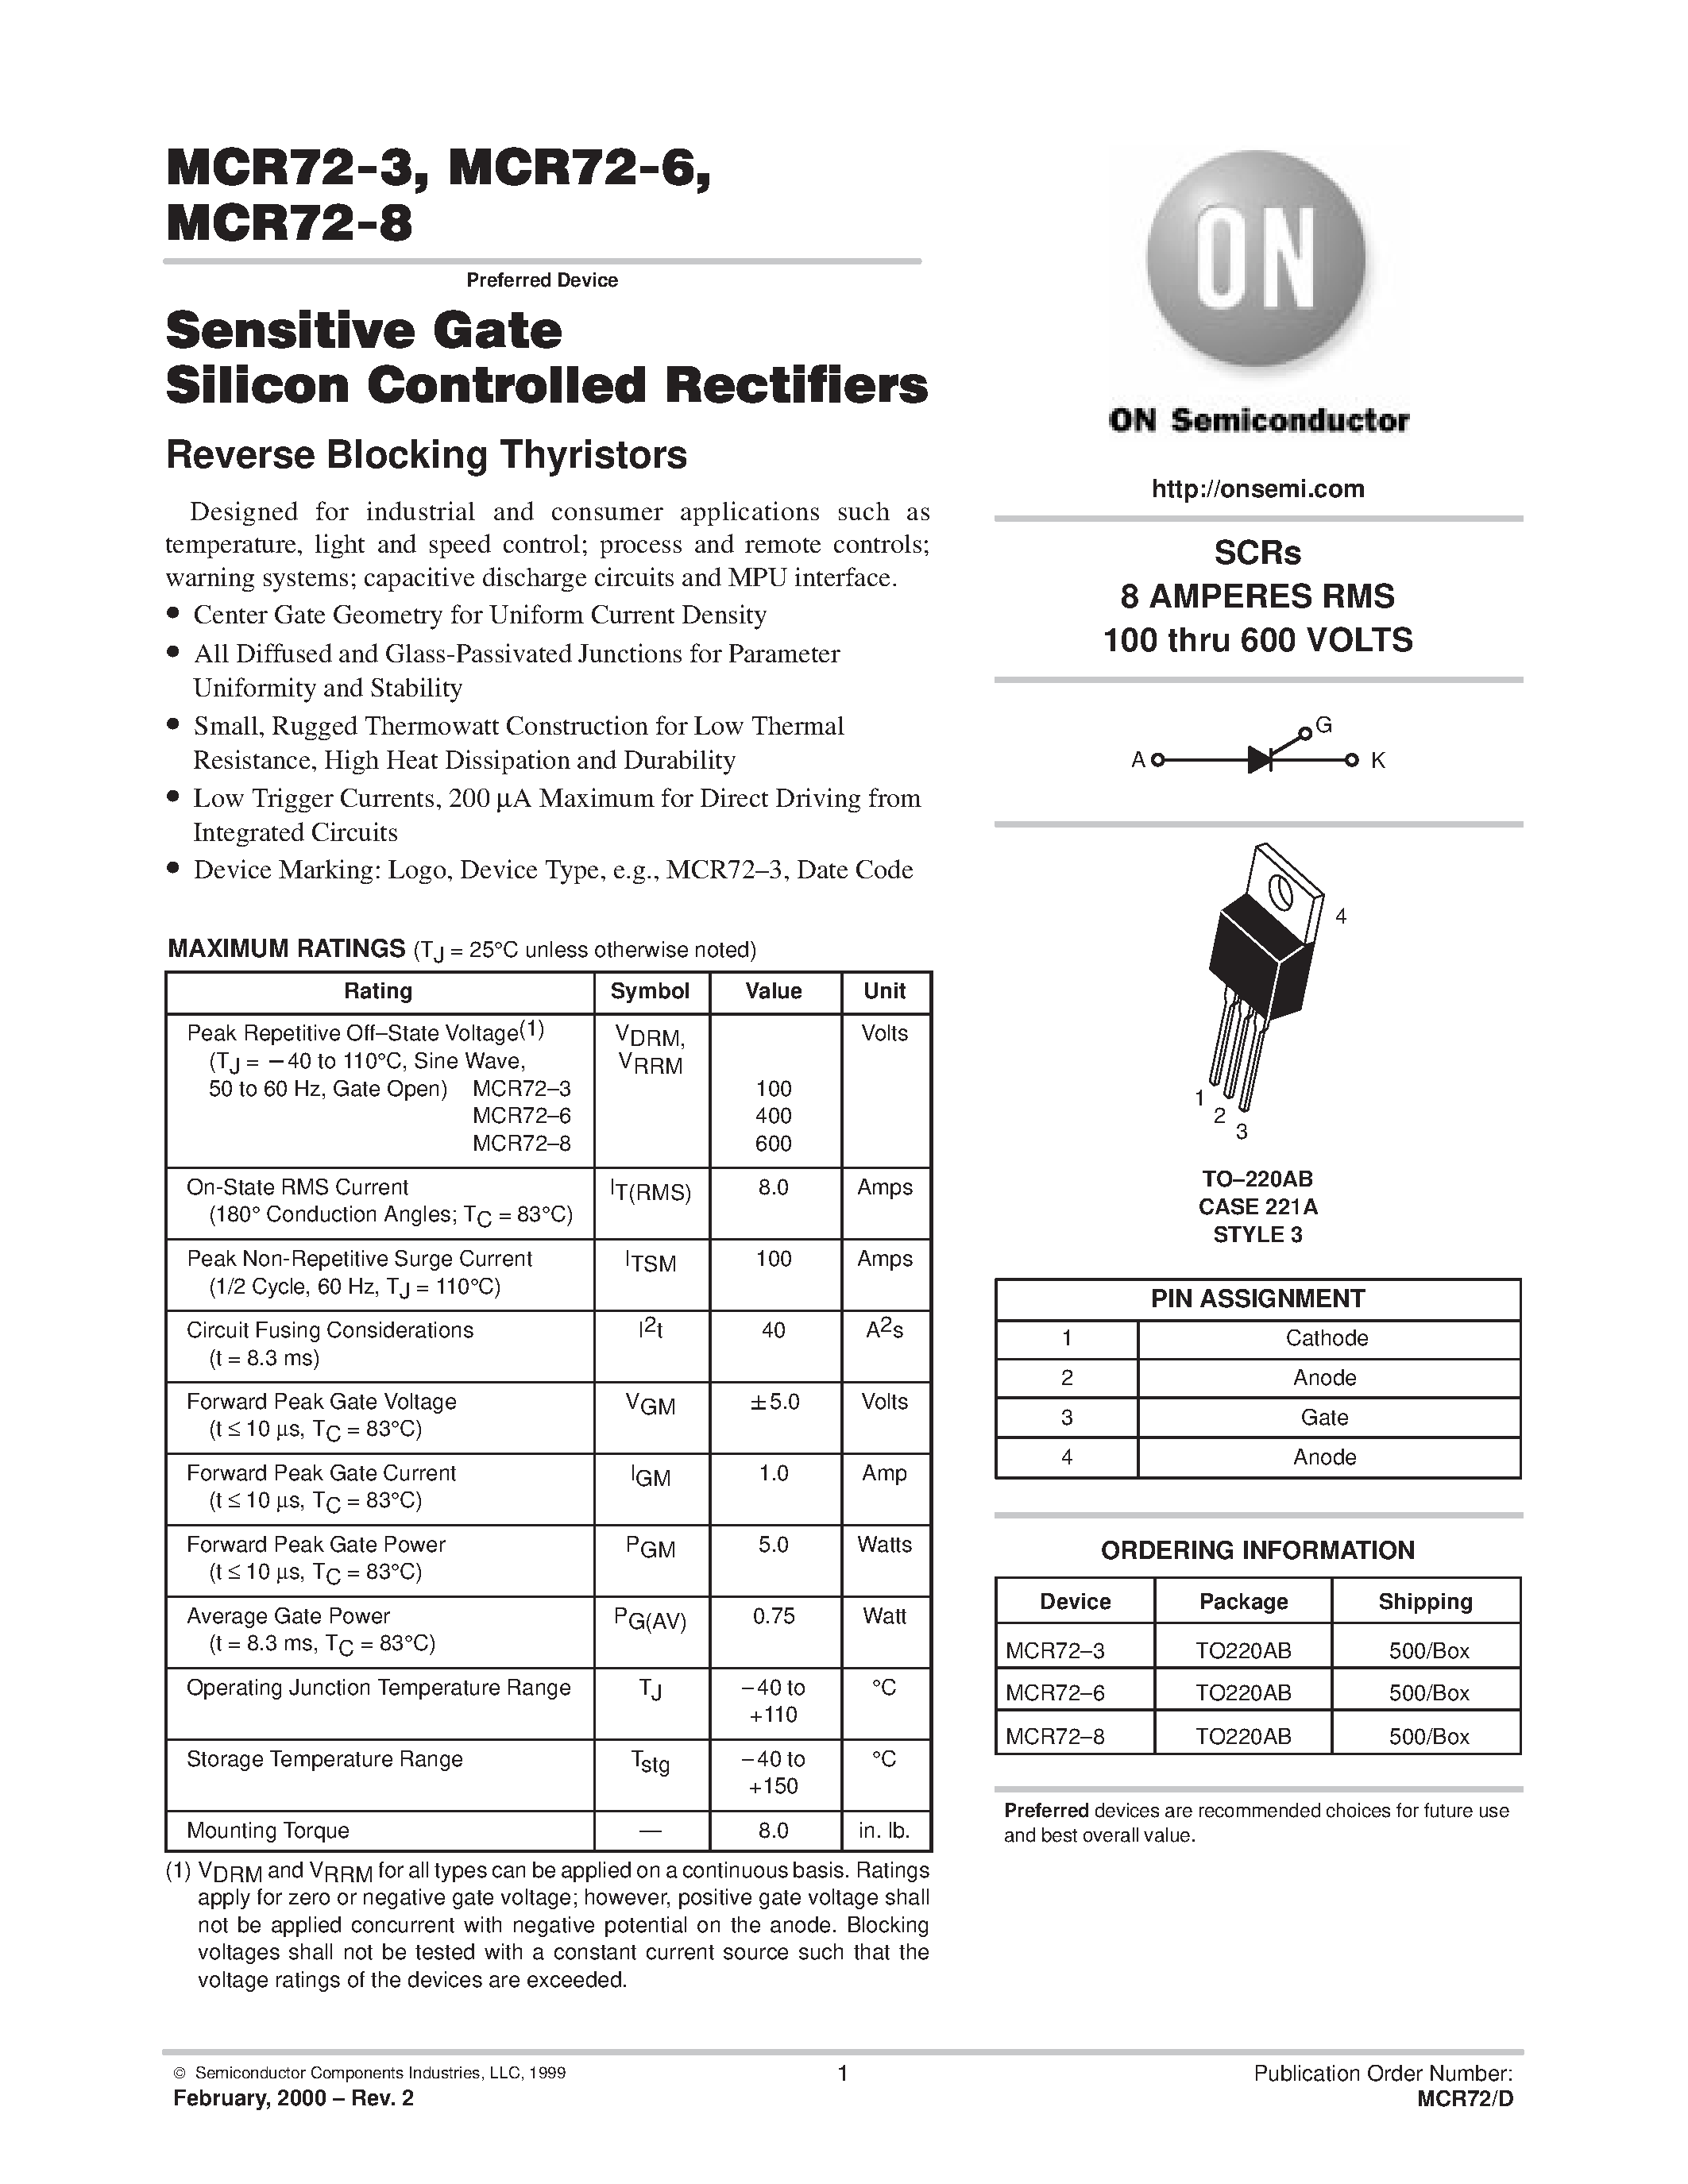 Datasheet MCR72-8 - SENSITIVE GATE SILICON CONTROLLED RECTIFIERS page 1